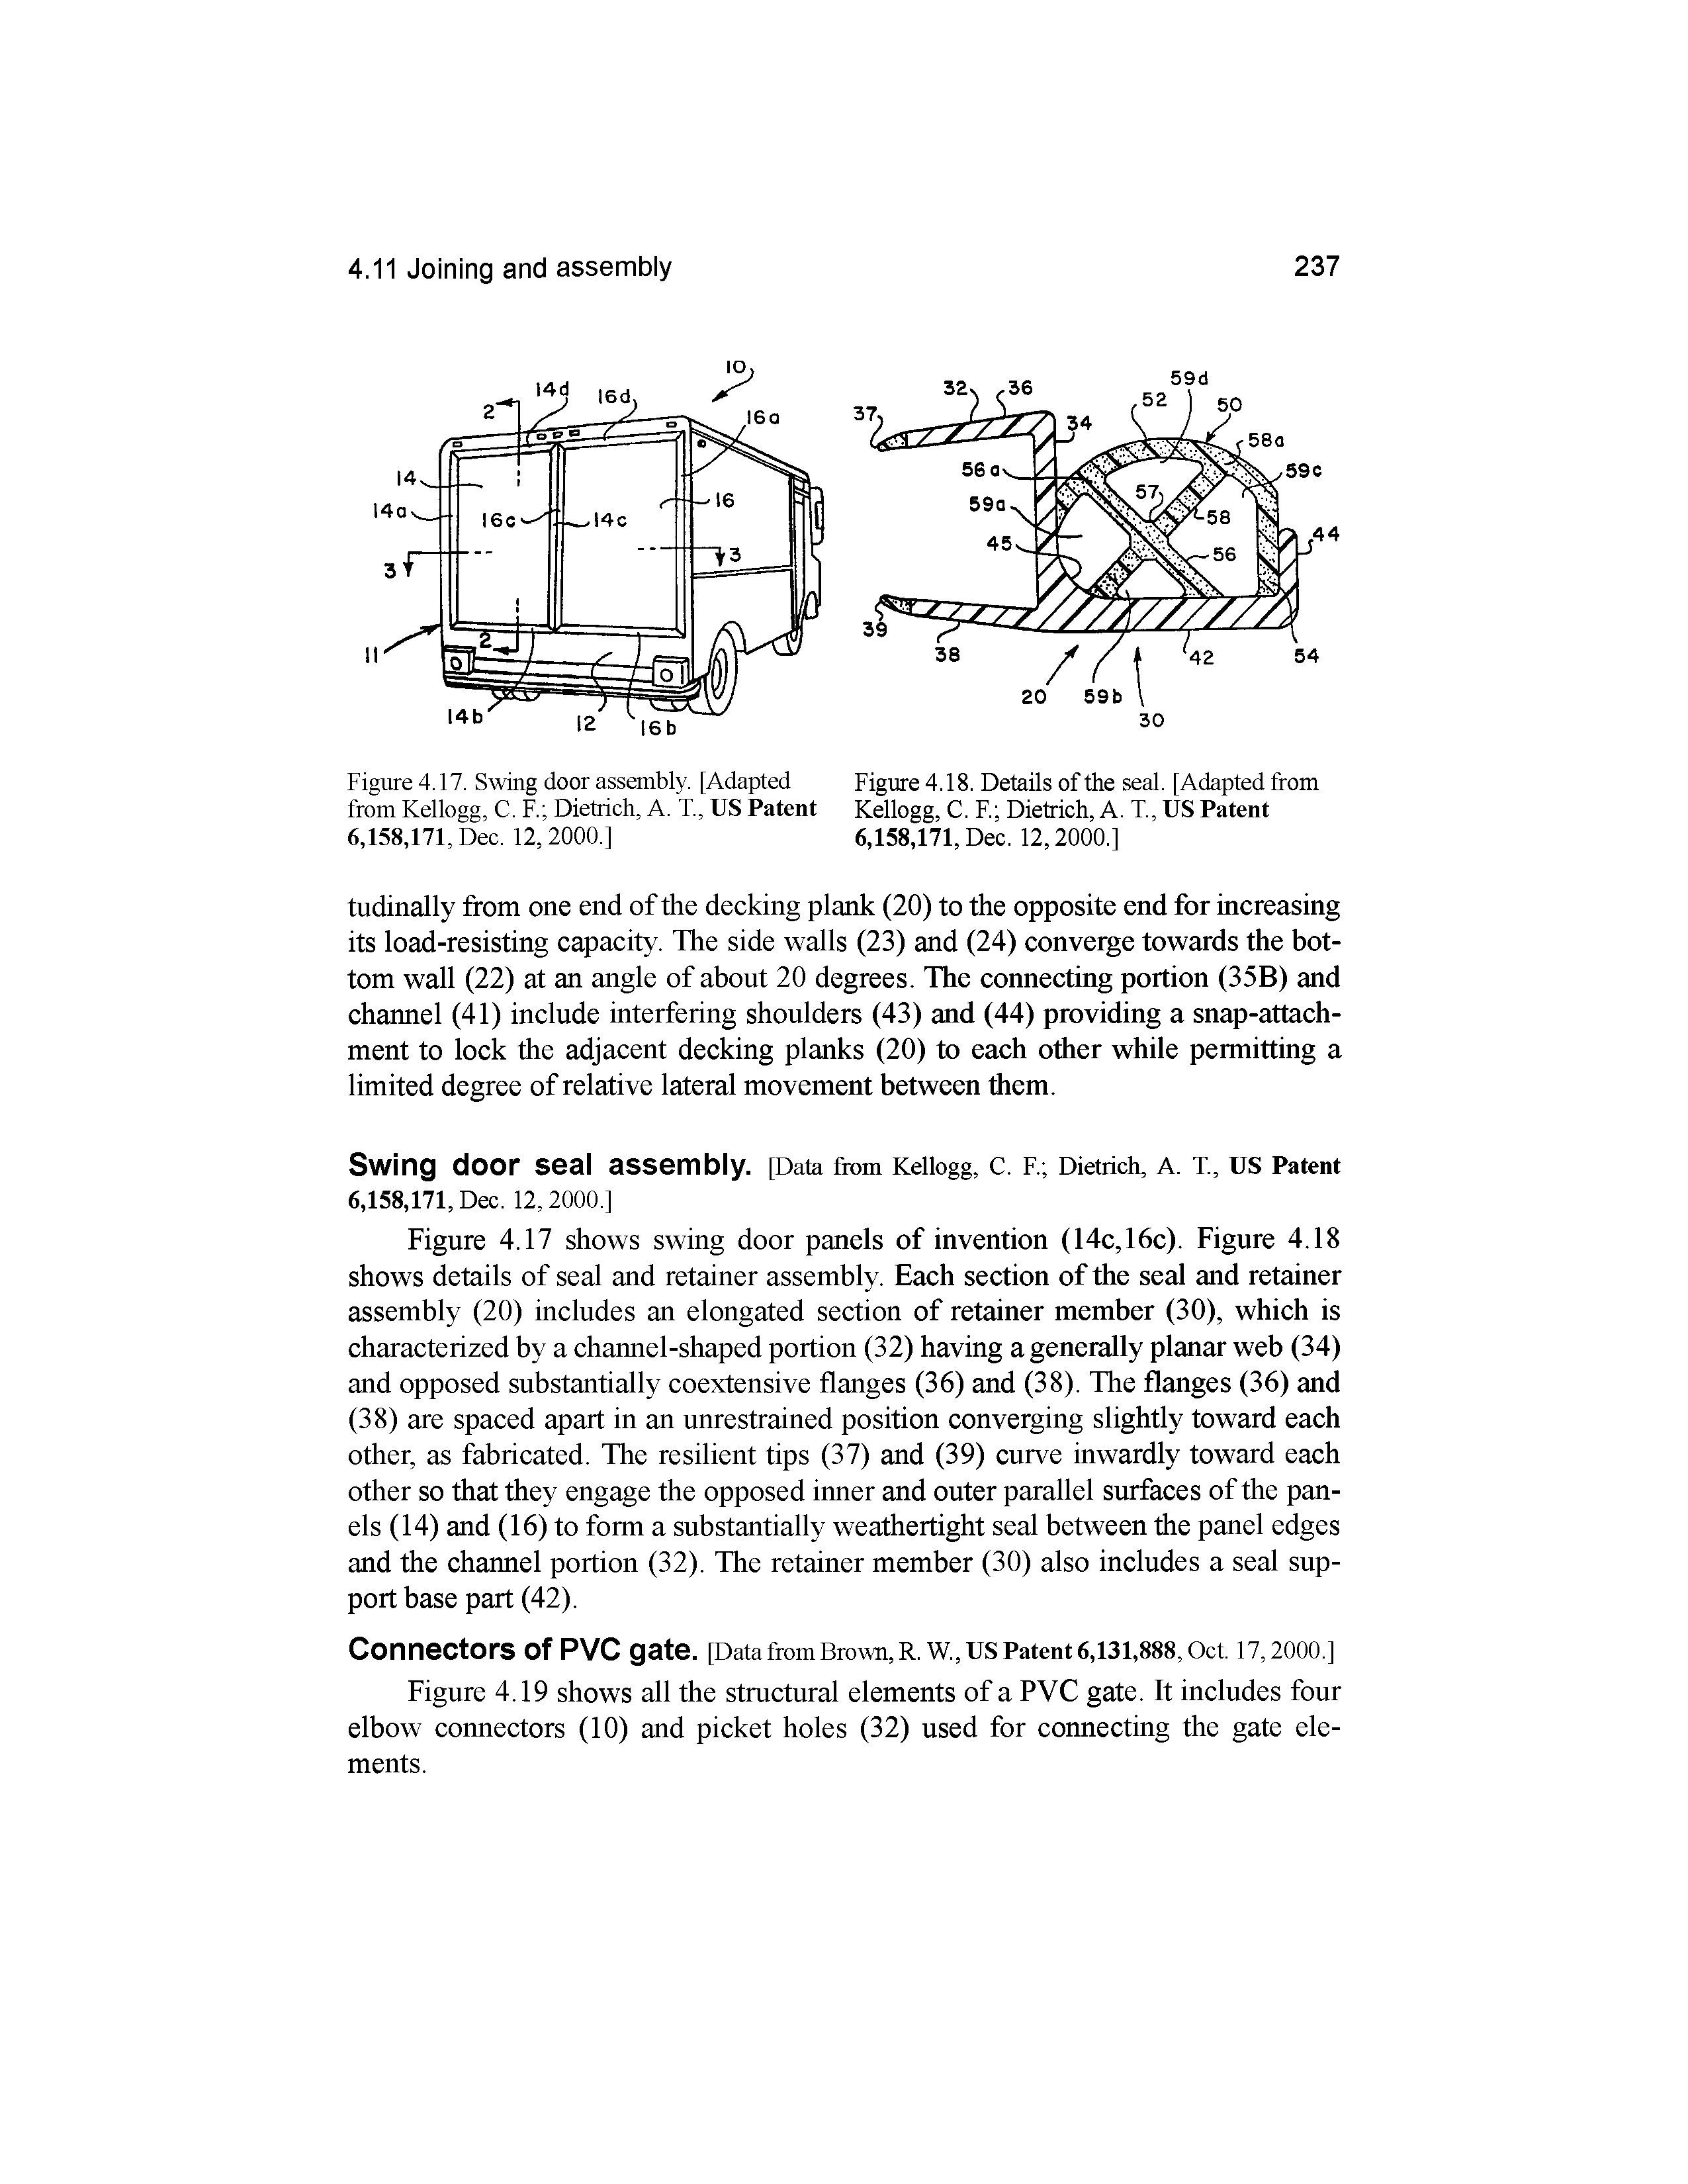 Figure 4.17. Swing door assembly. [Adapted Figure 4.18. Details of the seal. [Adapted from from Kellogg, C. F. Dietrich, A. T, US Patent Kellogg, C. R Dietrich, A. T., US Patent...